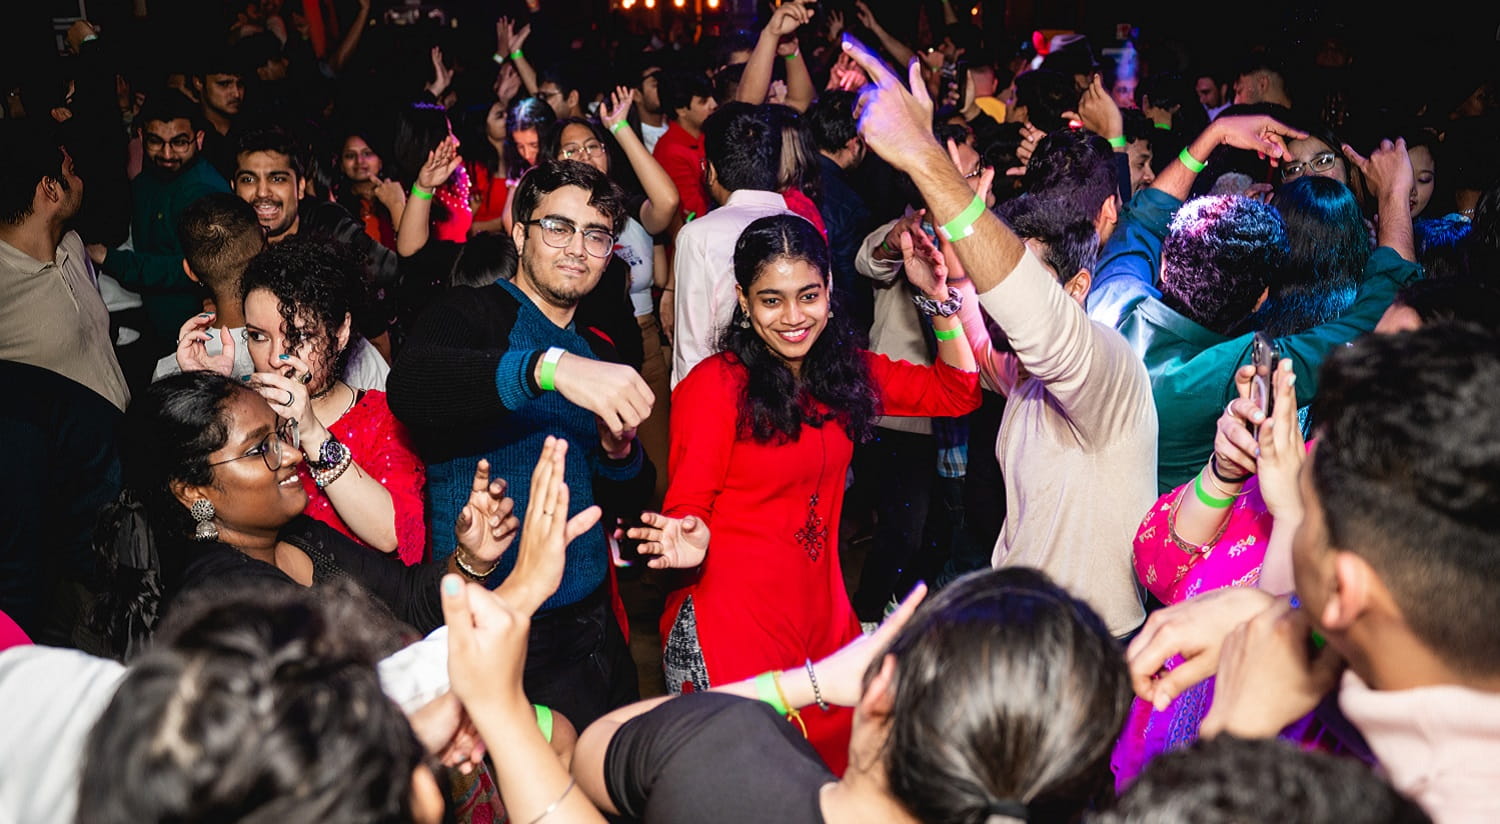 International students hit the dance floor at The In-Between